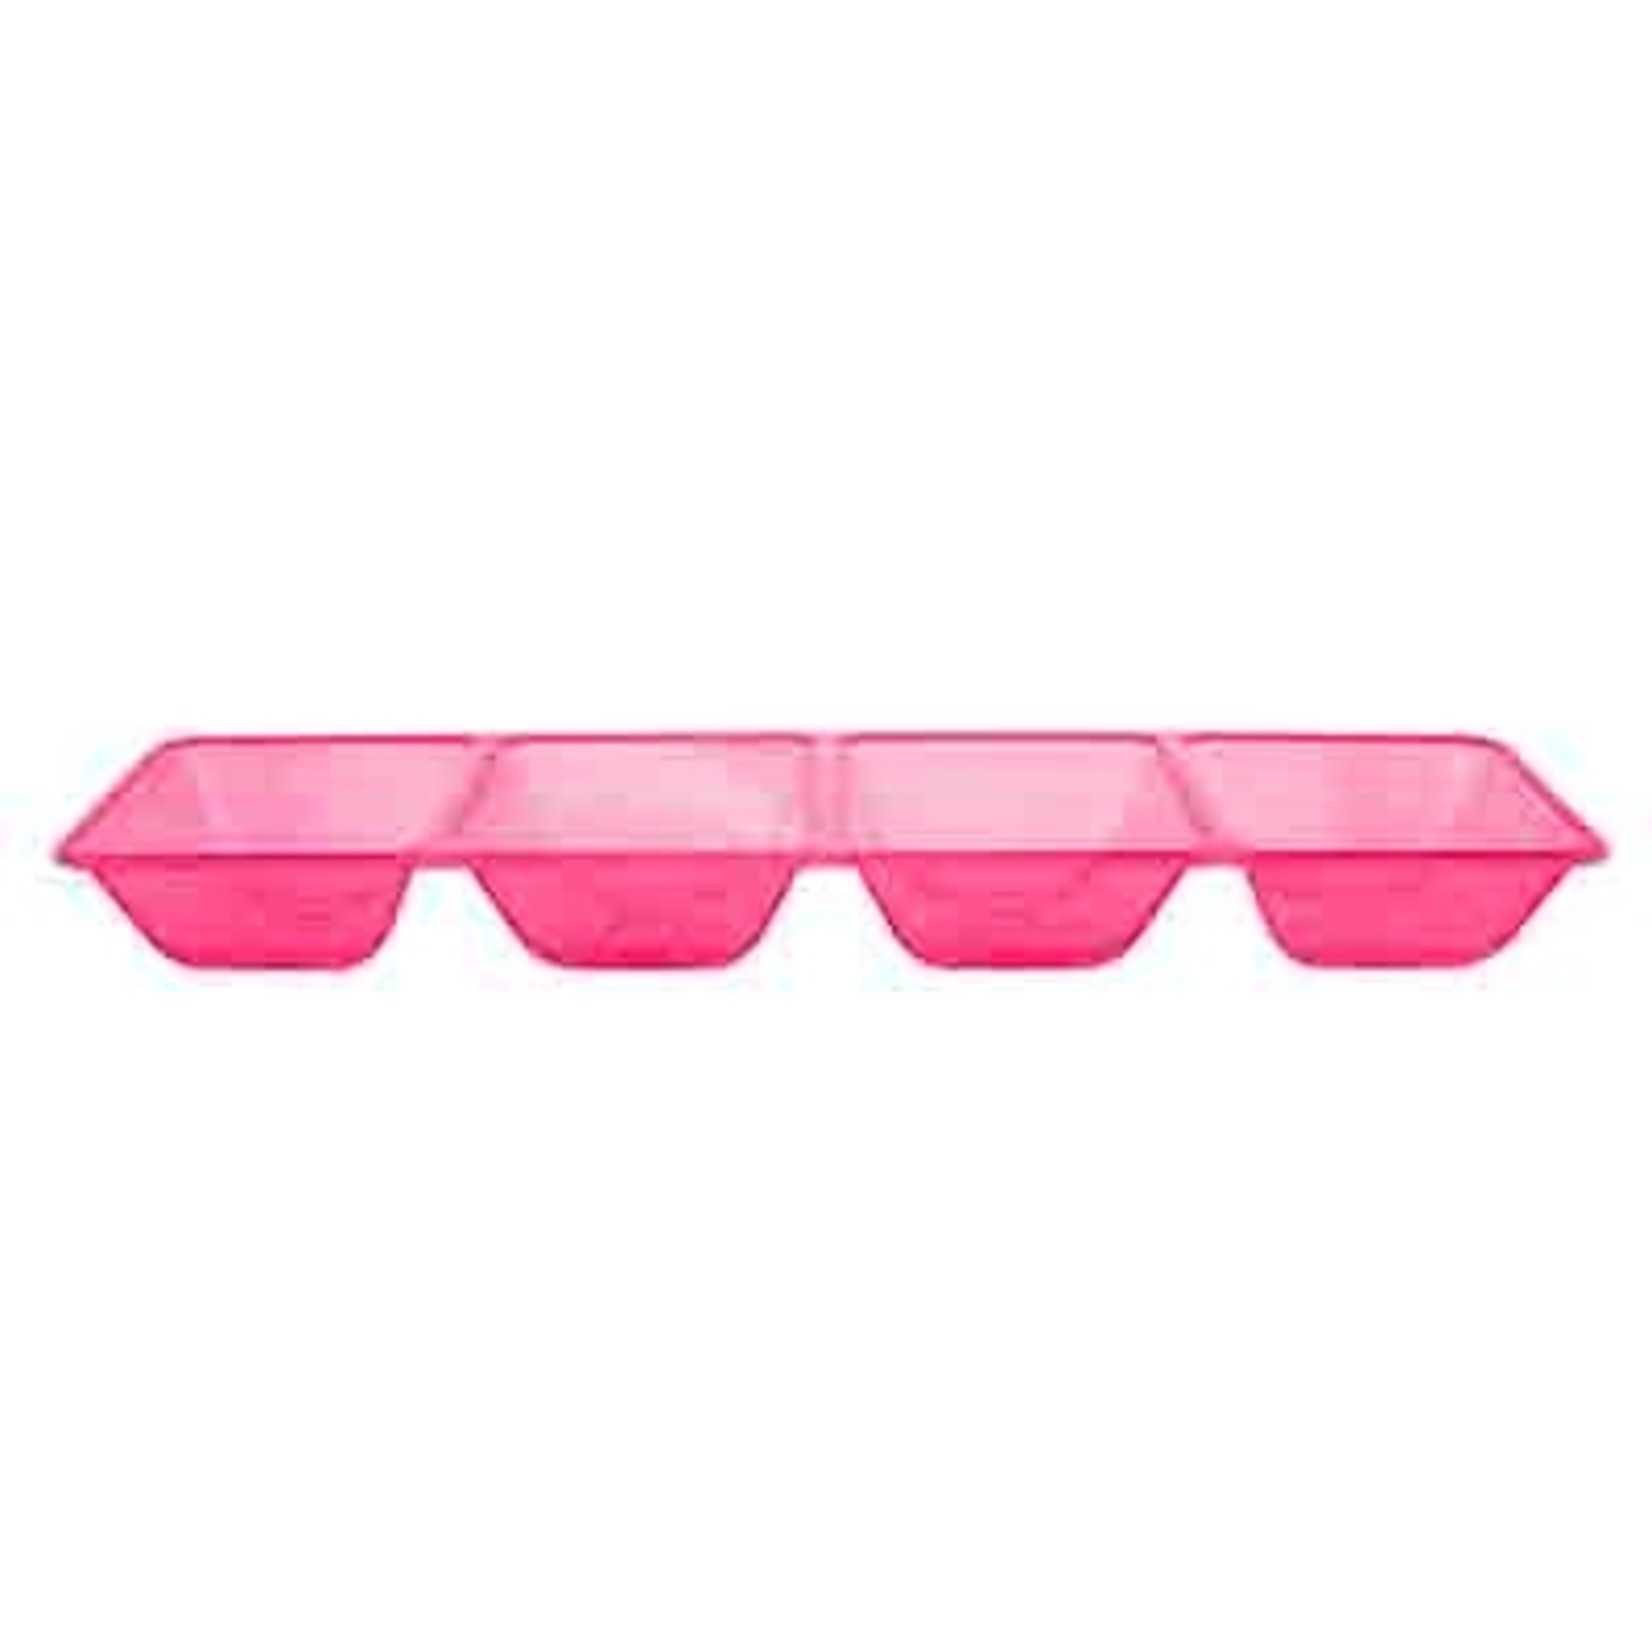 northwest Neon Pink 4 Compartment Serving Tray - 1ct.